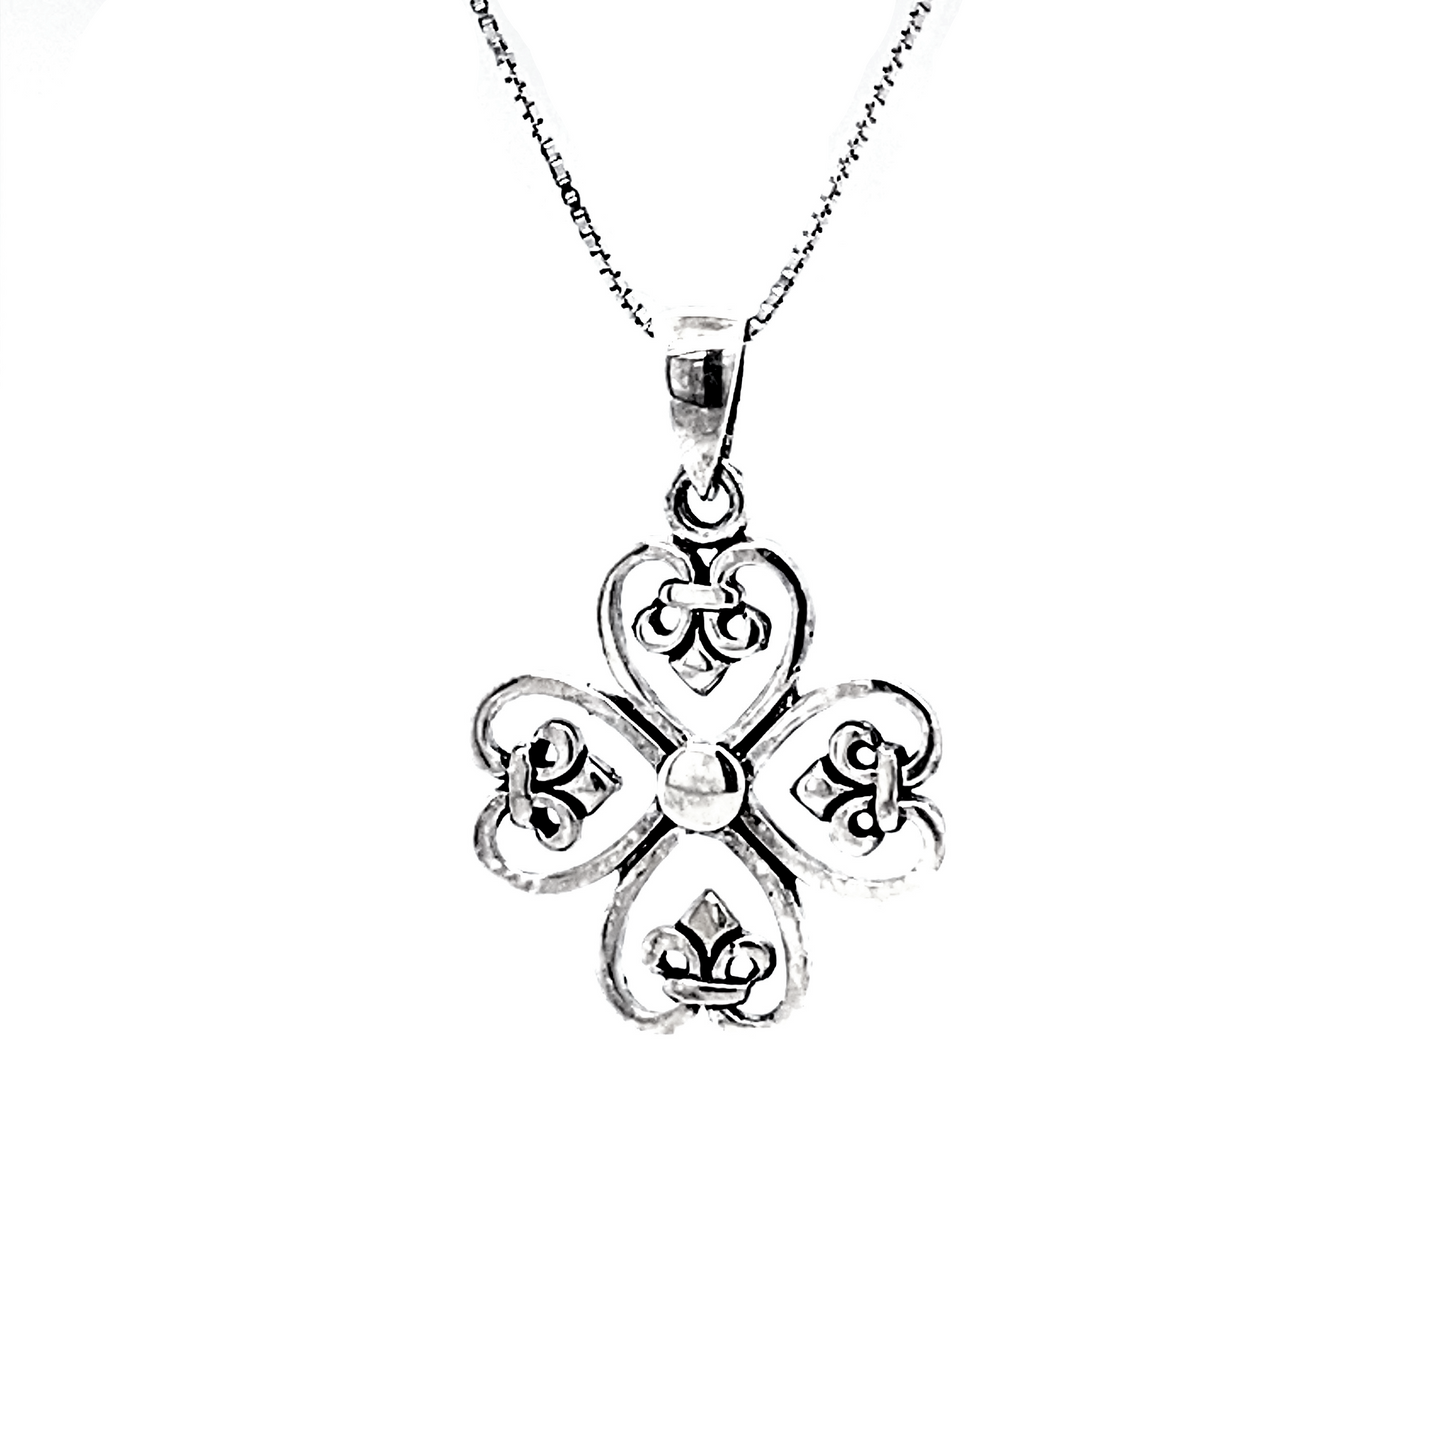 Vintage style Clover Cross Pendant with Fleur De Lis in sterling silver, a lucky Irish charm.